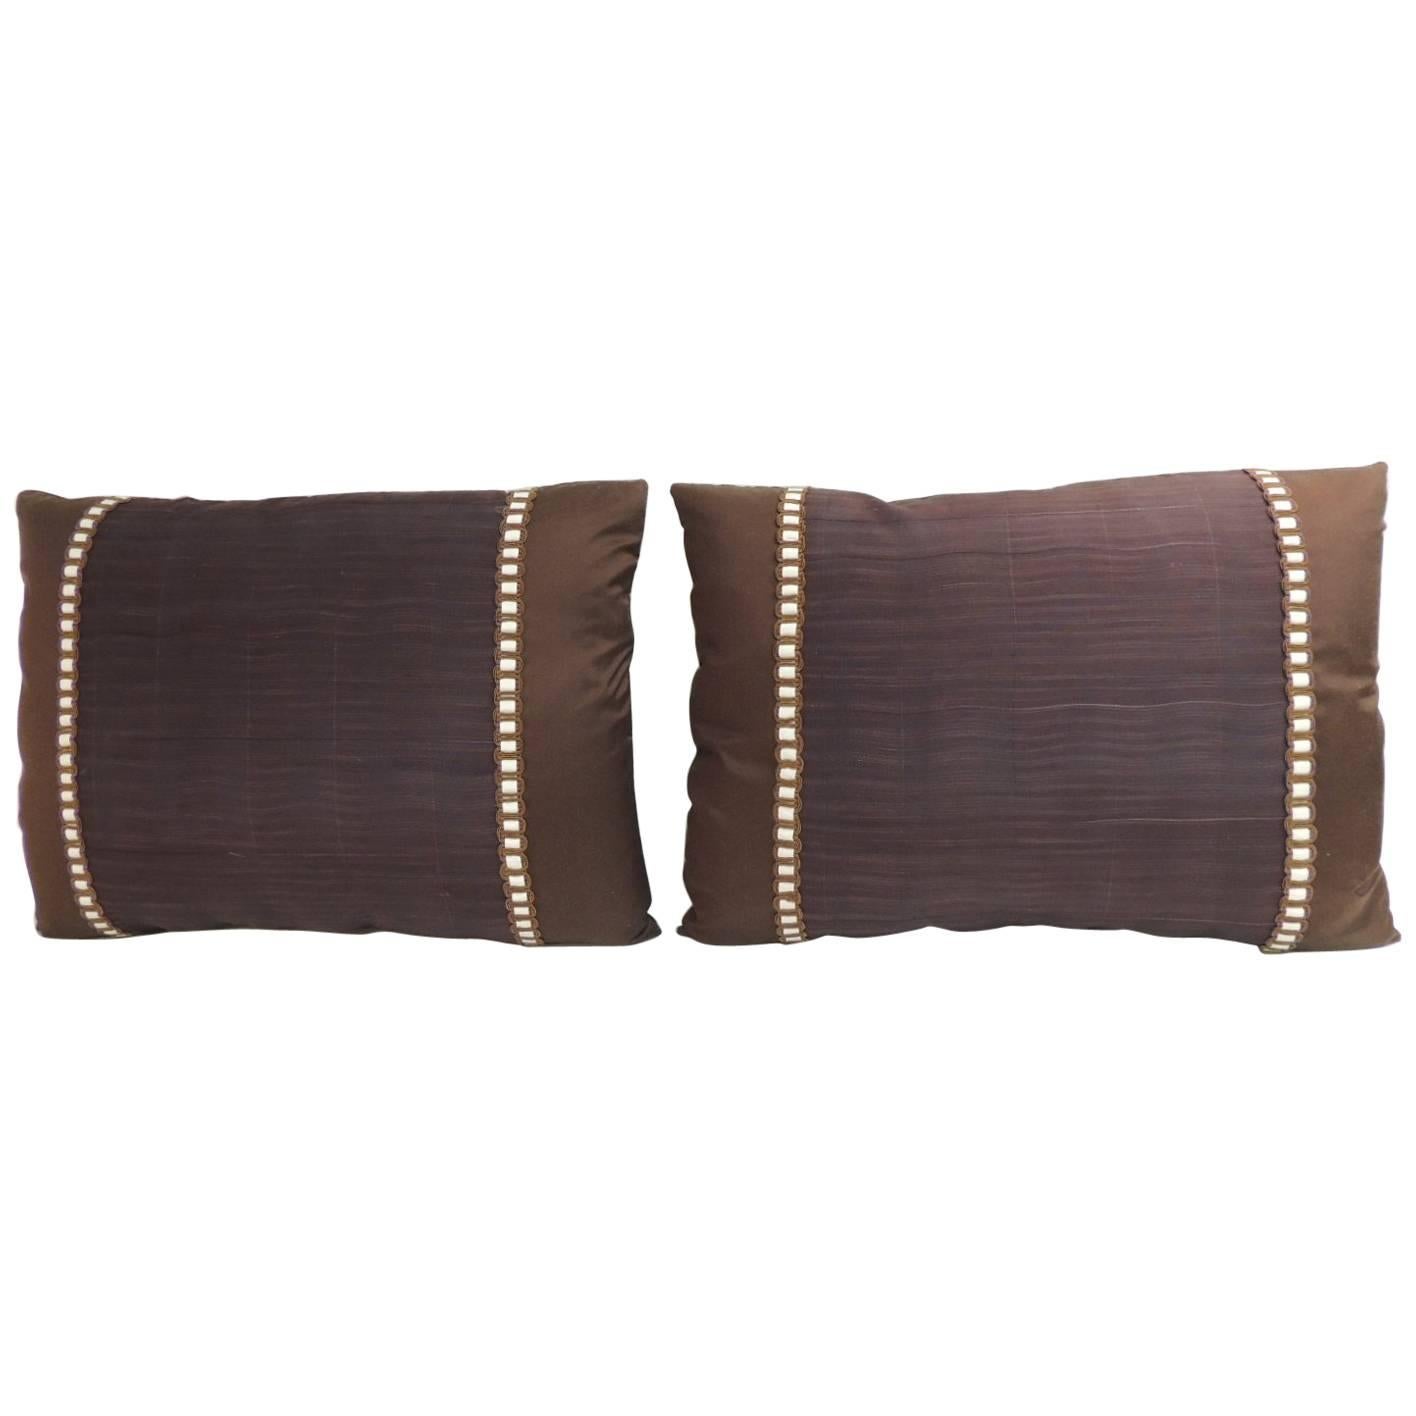 Pair of Vintage Brown and Purple Obi Woven Textile Bolster Decorative Pillows